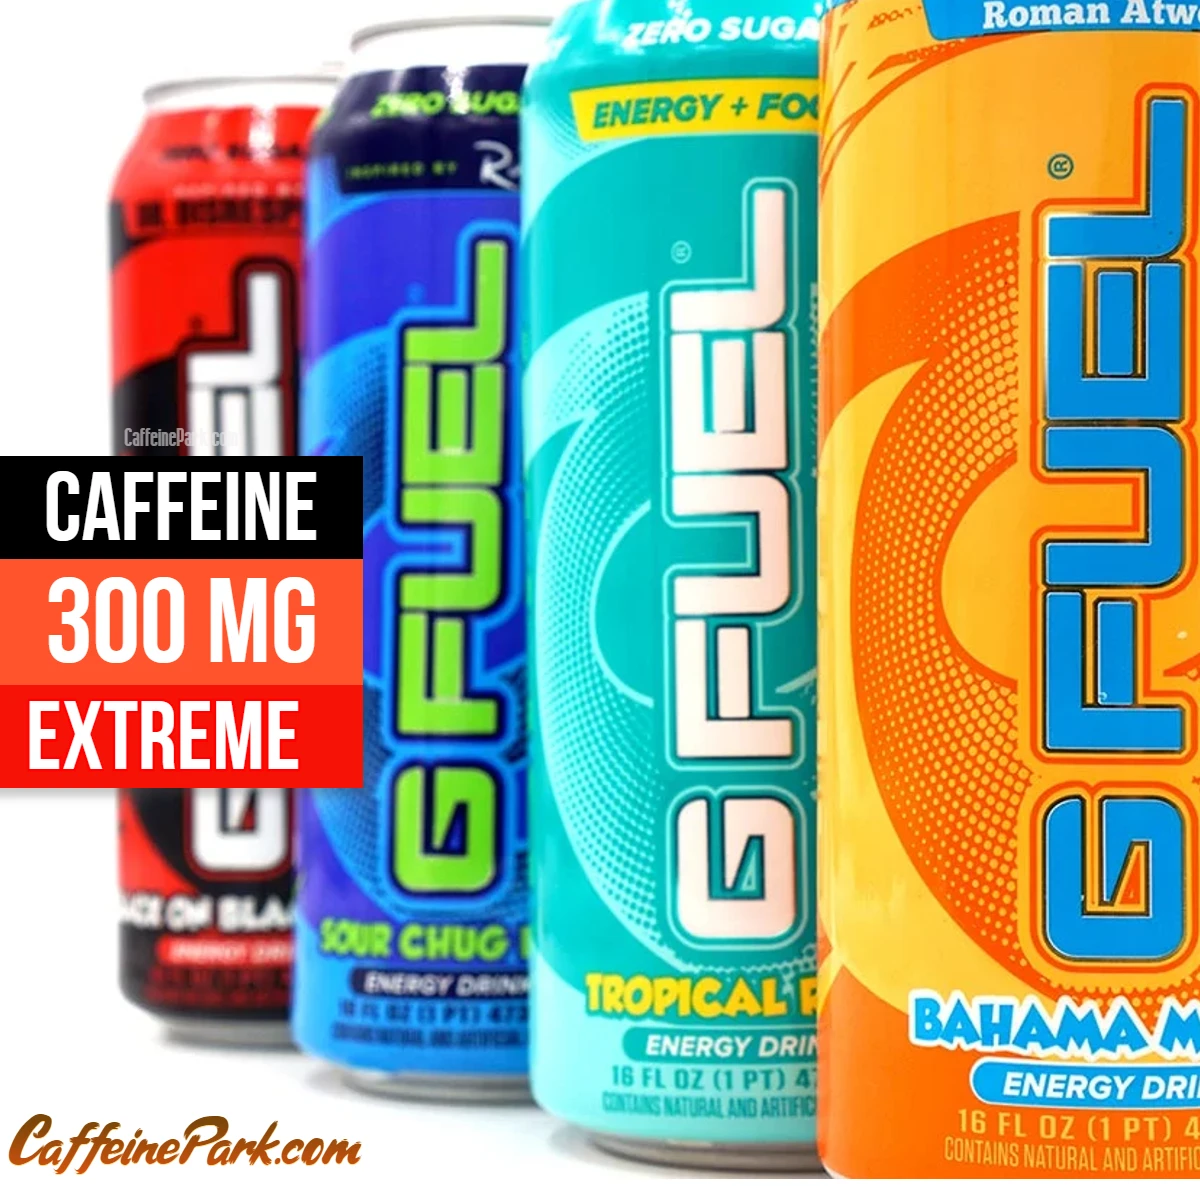 GFuel Caffeine Content: Much is a can?